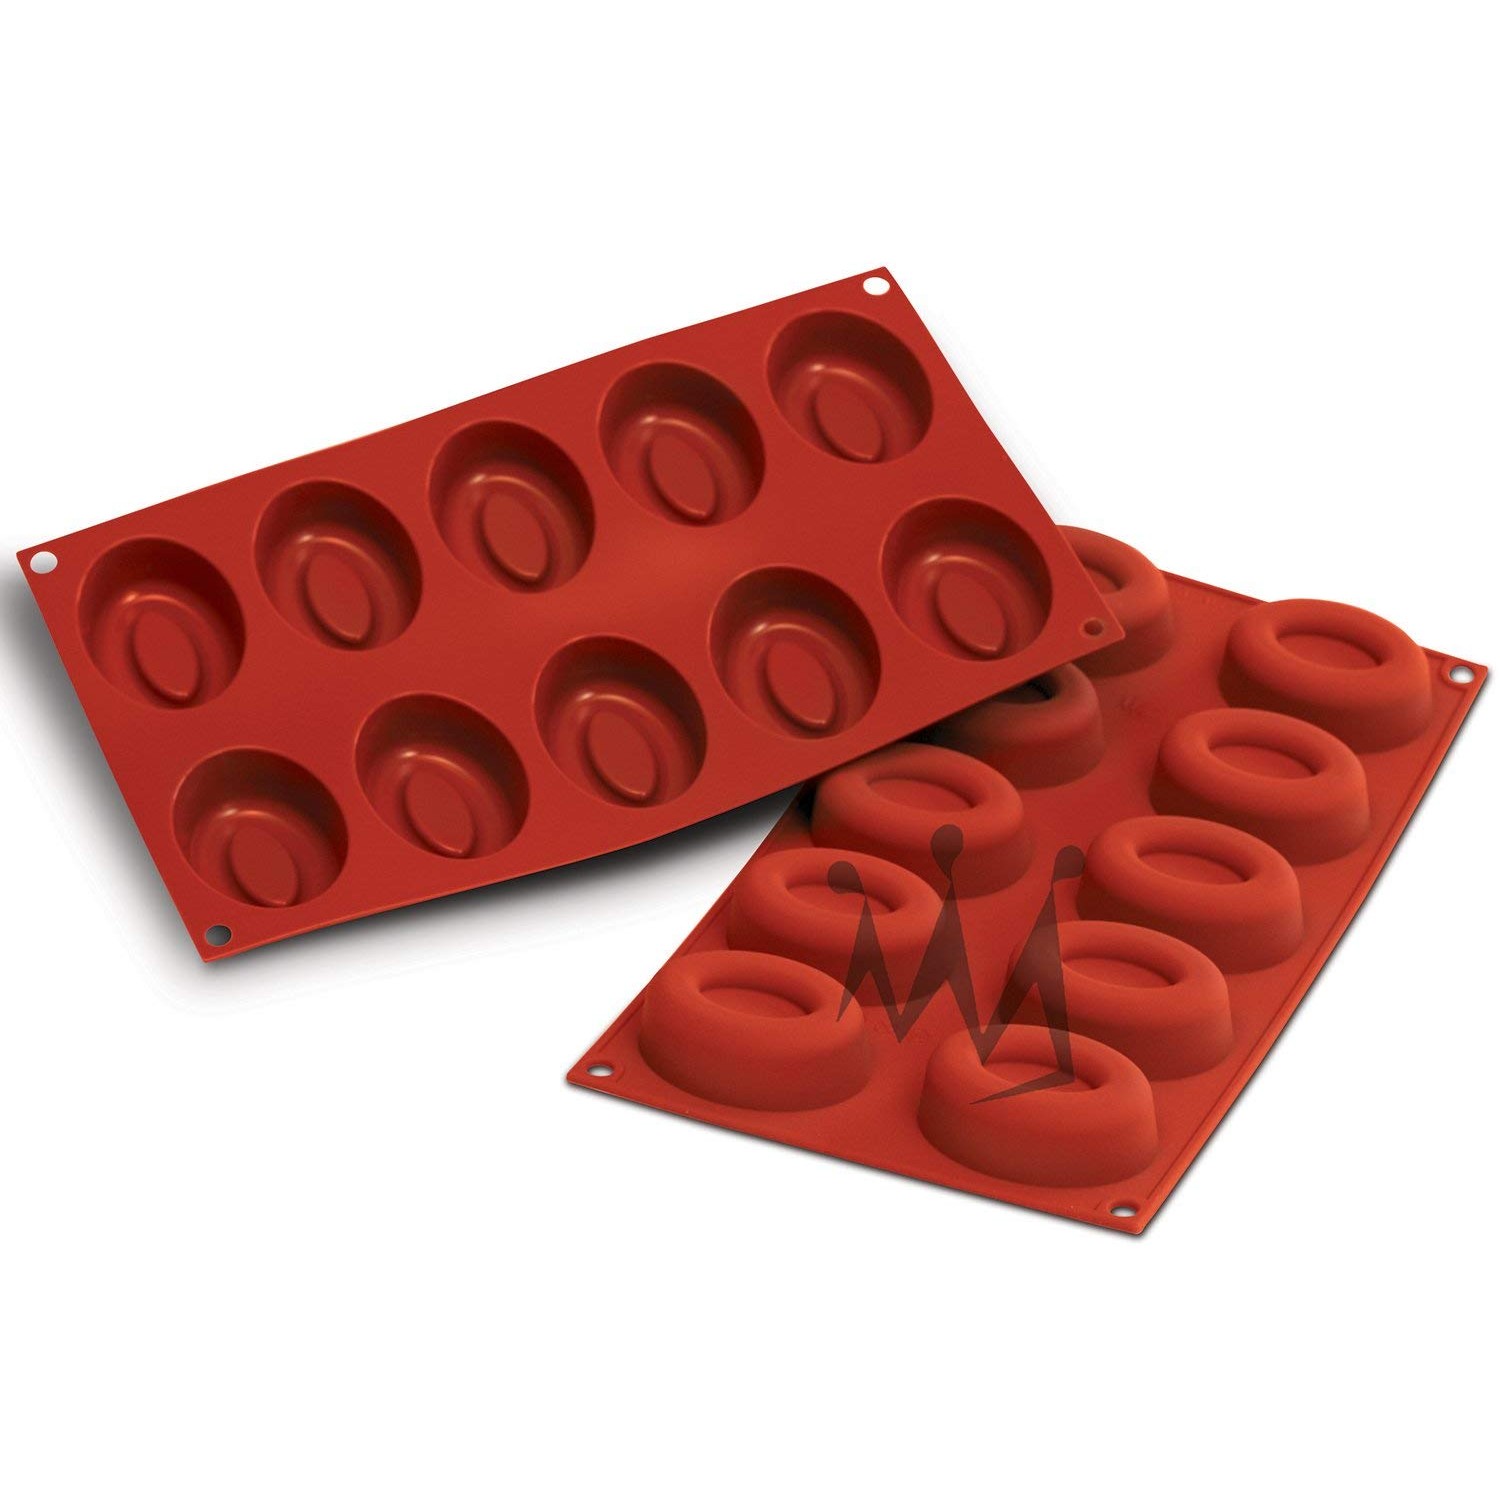 Silikomart Silicone Classic Collection Mold Shapes, Florentines